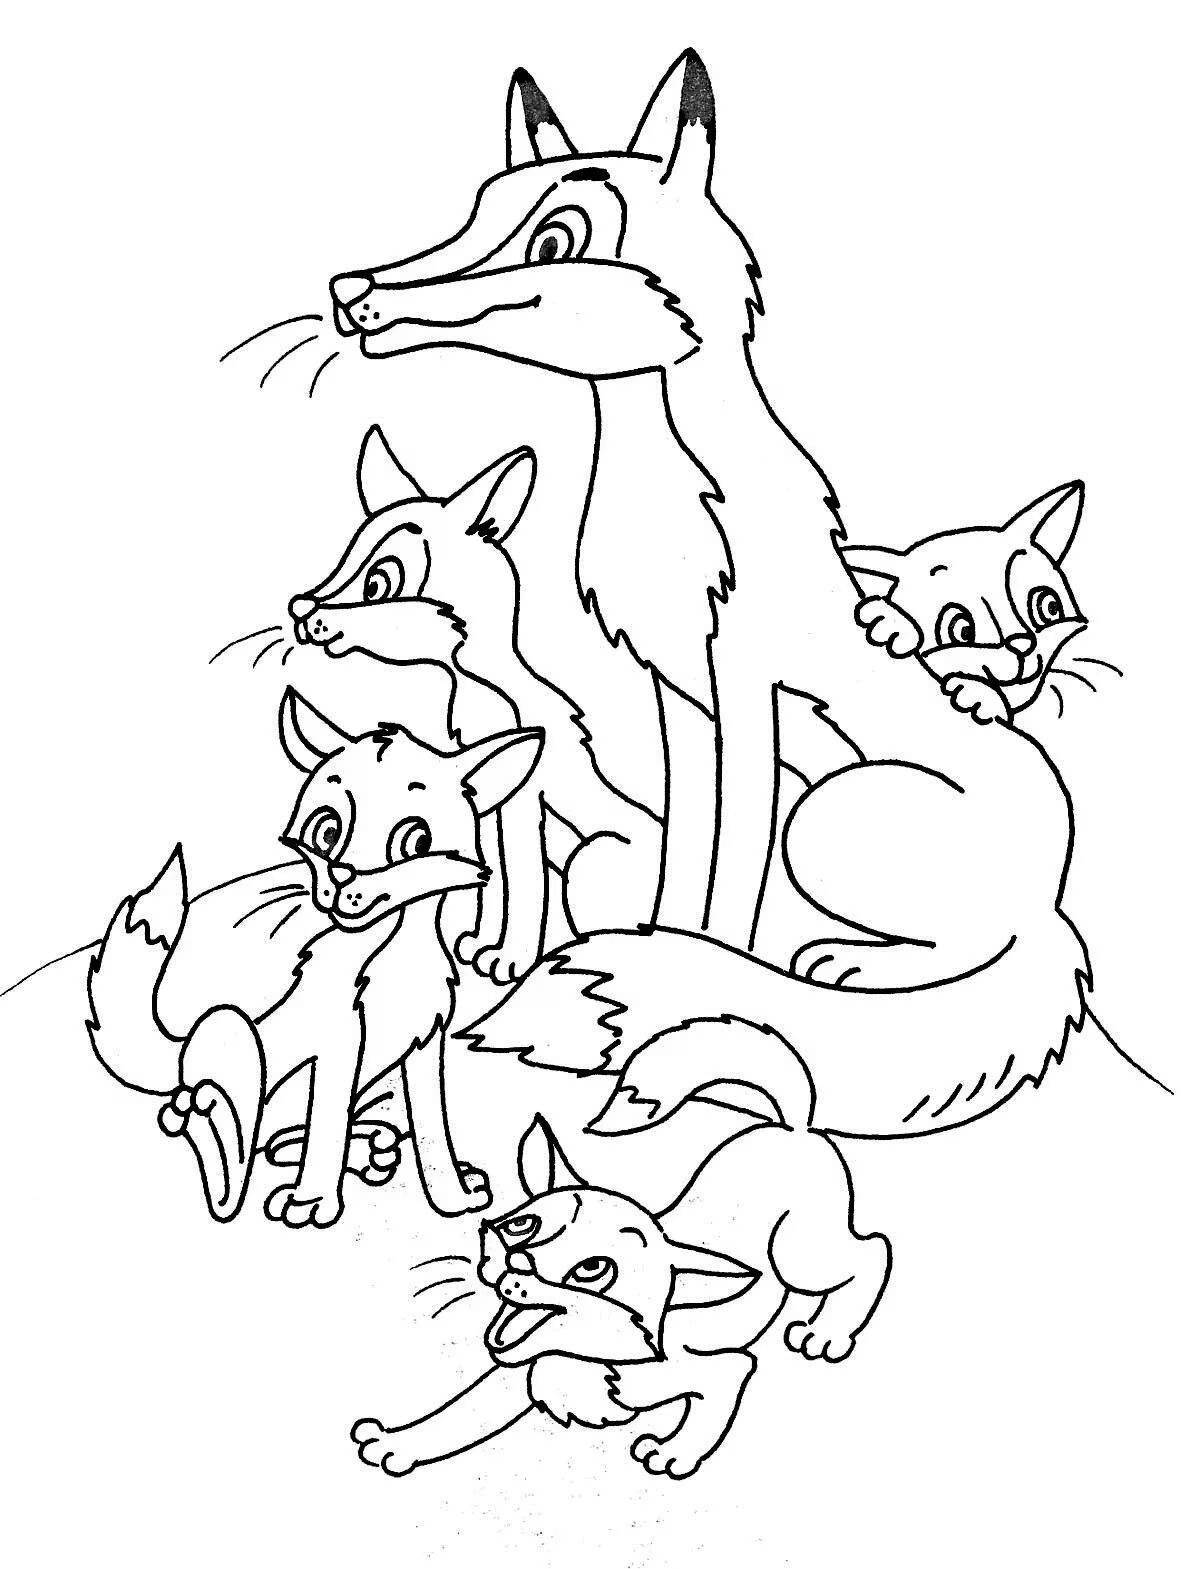 Coloring book dazzling fox for kids